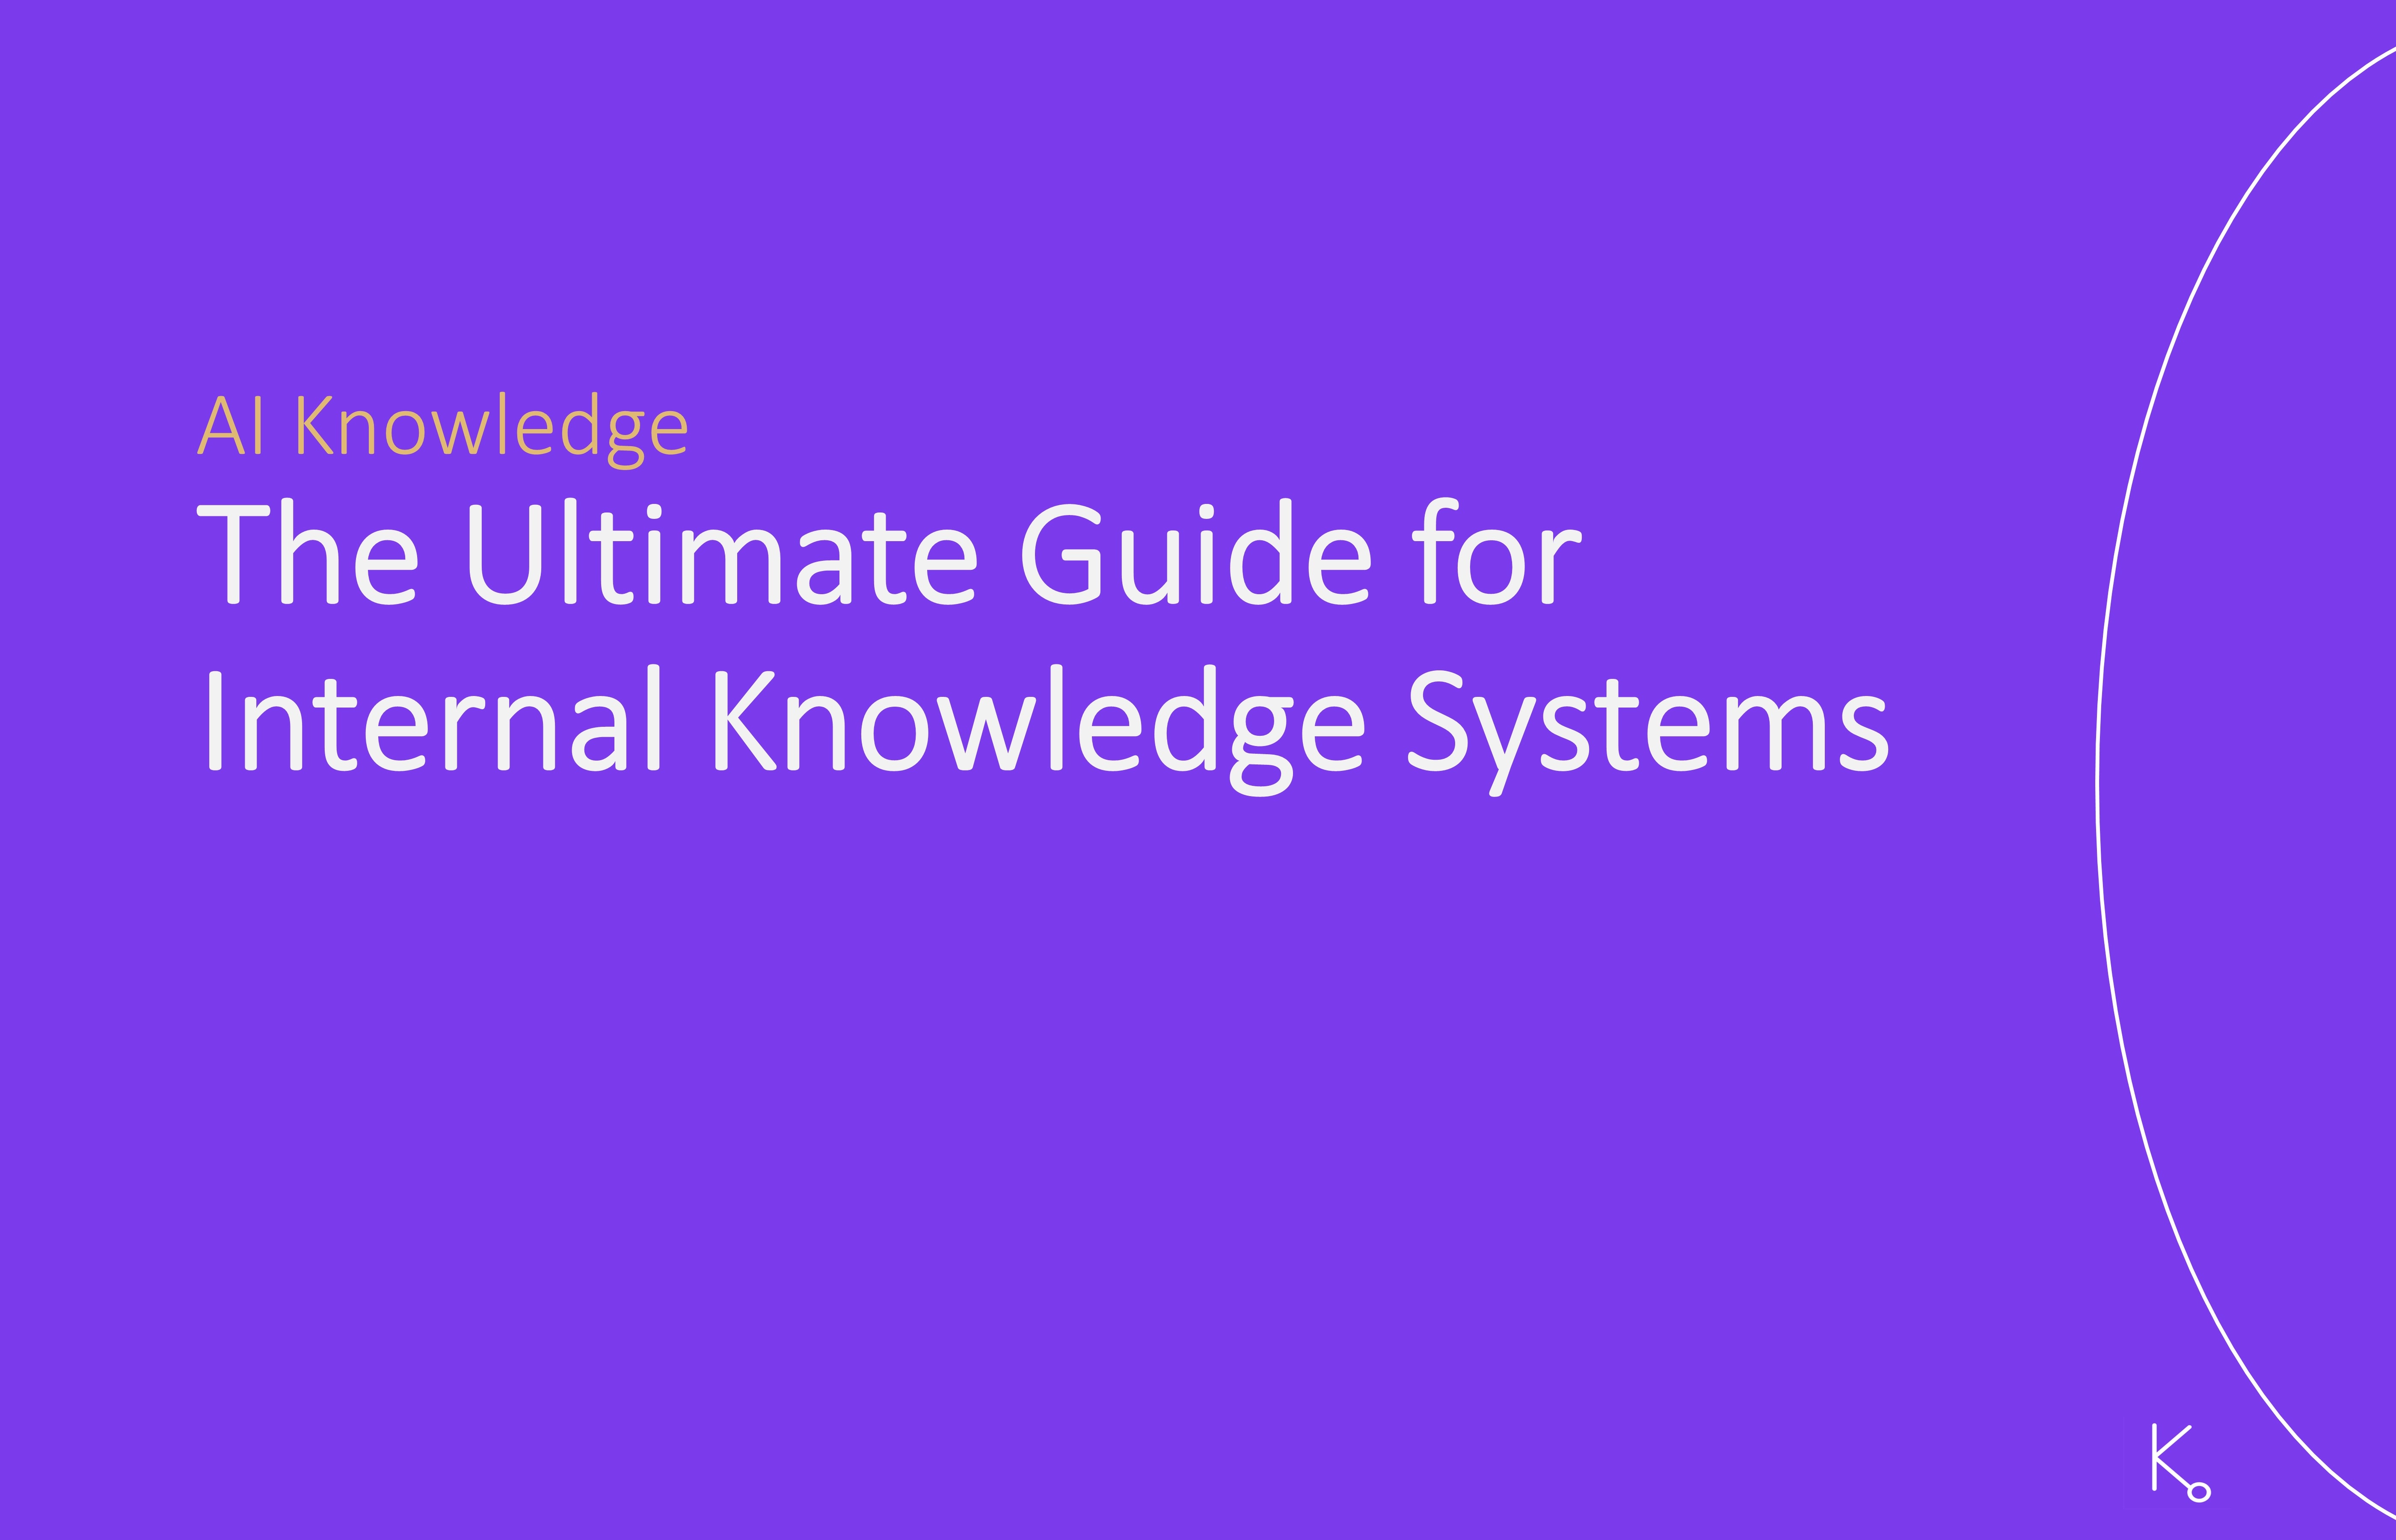 The Ultimate Guide for Internal Knowledge Systems